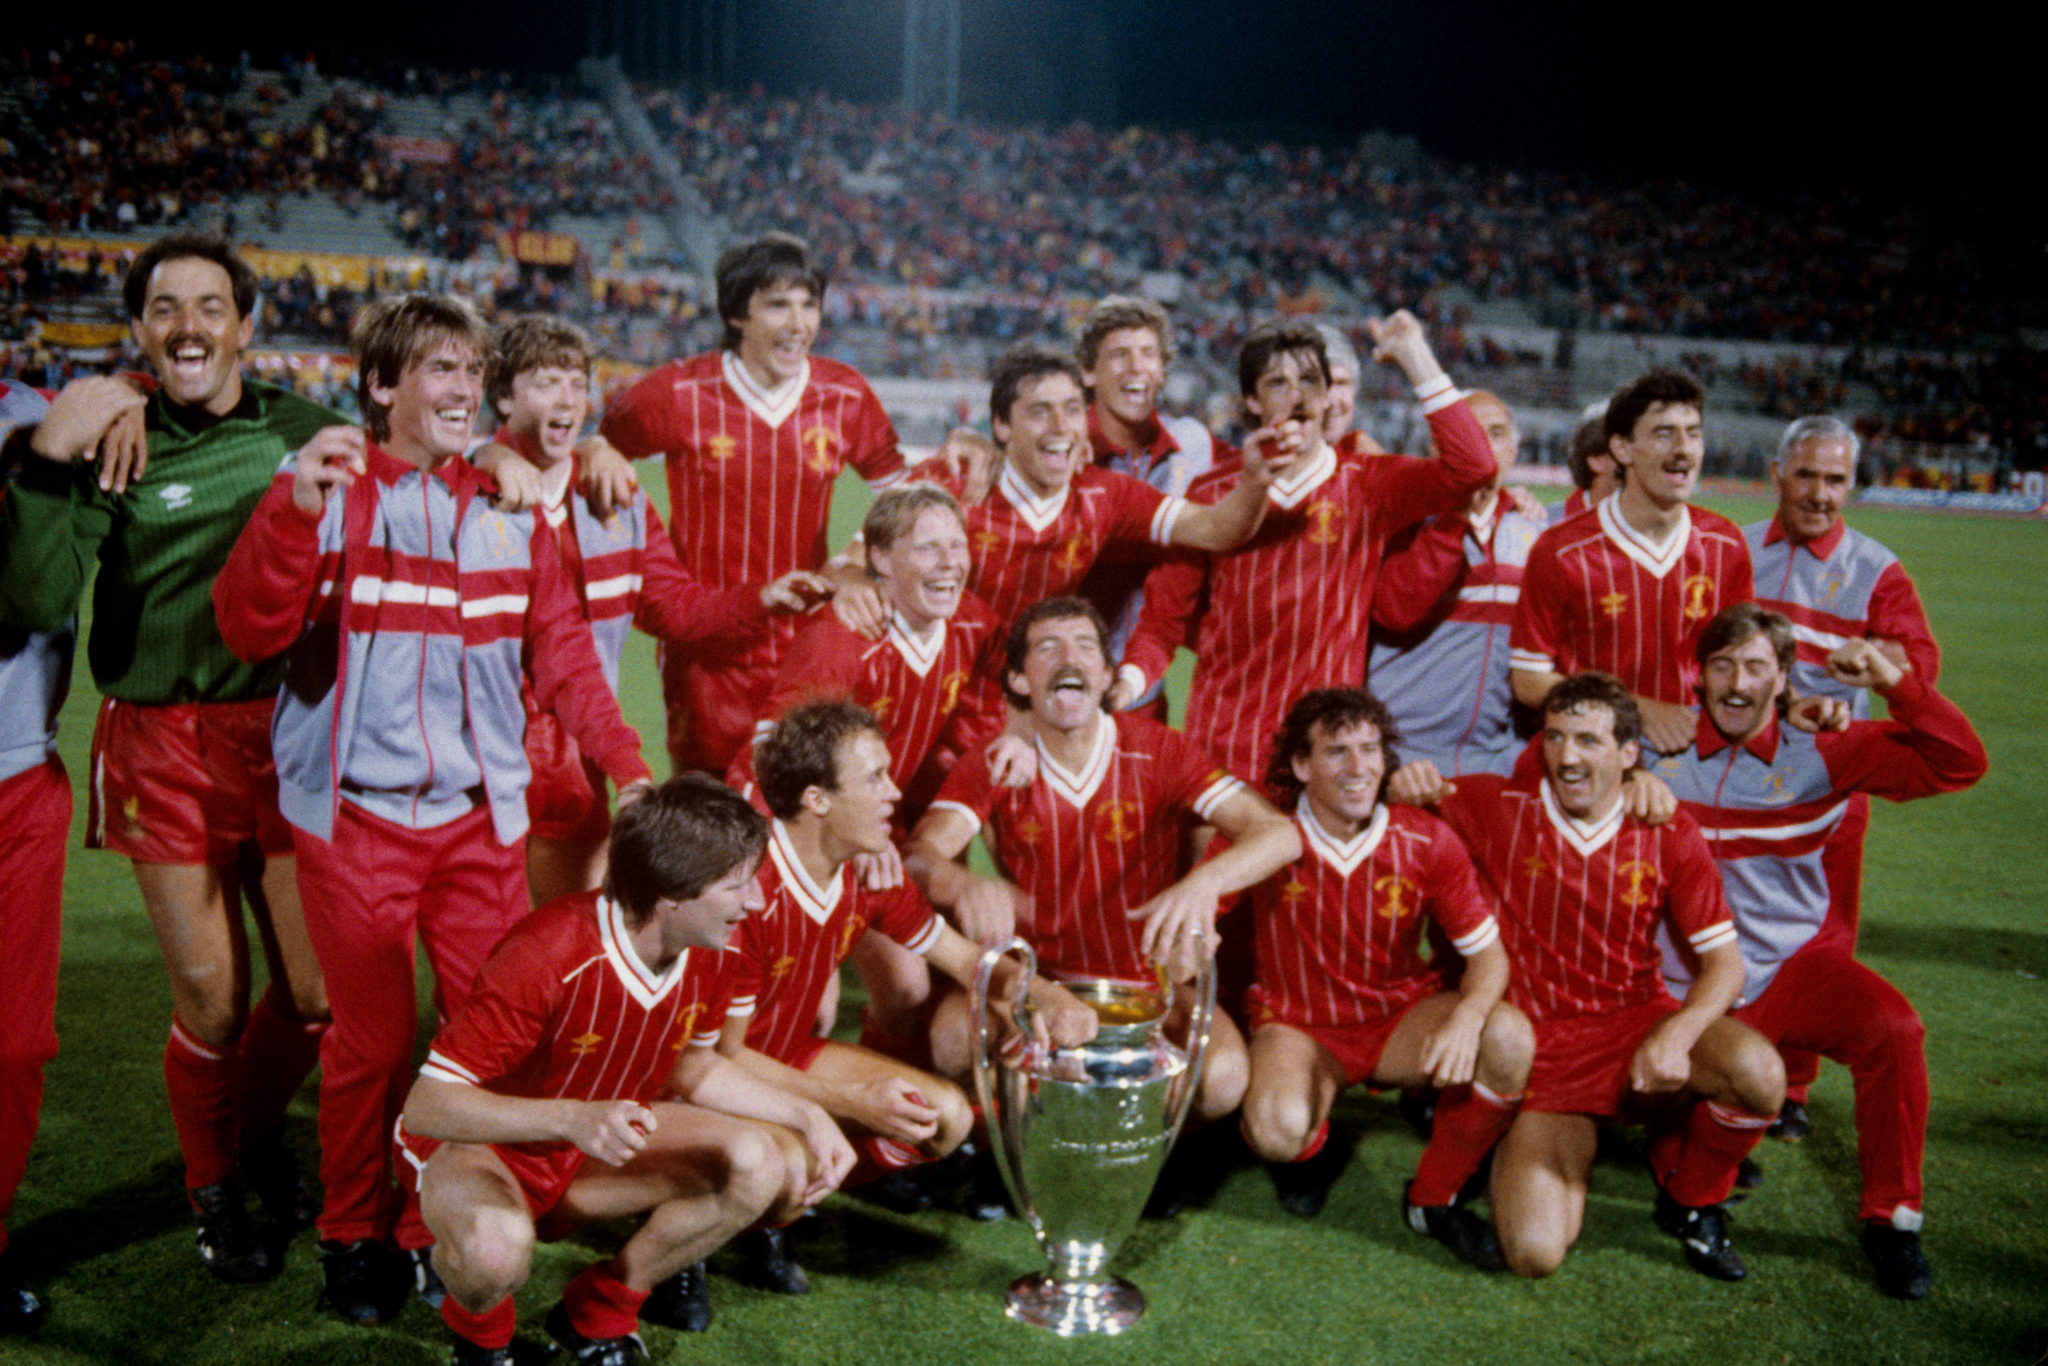 Liverpool European Cup title